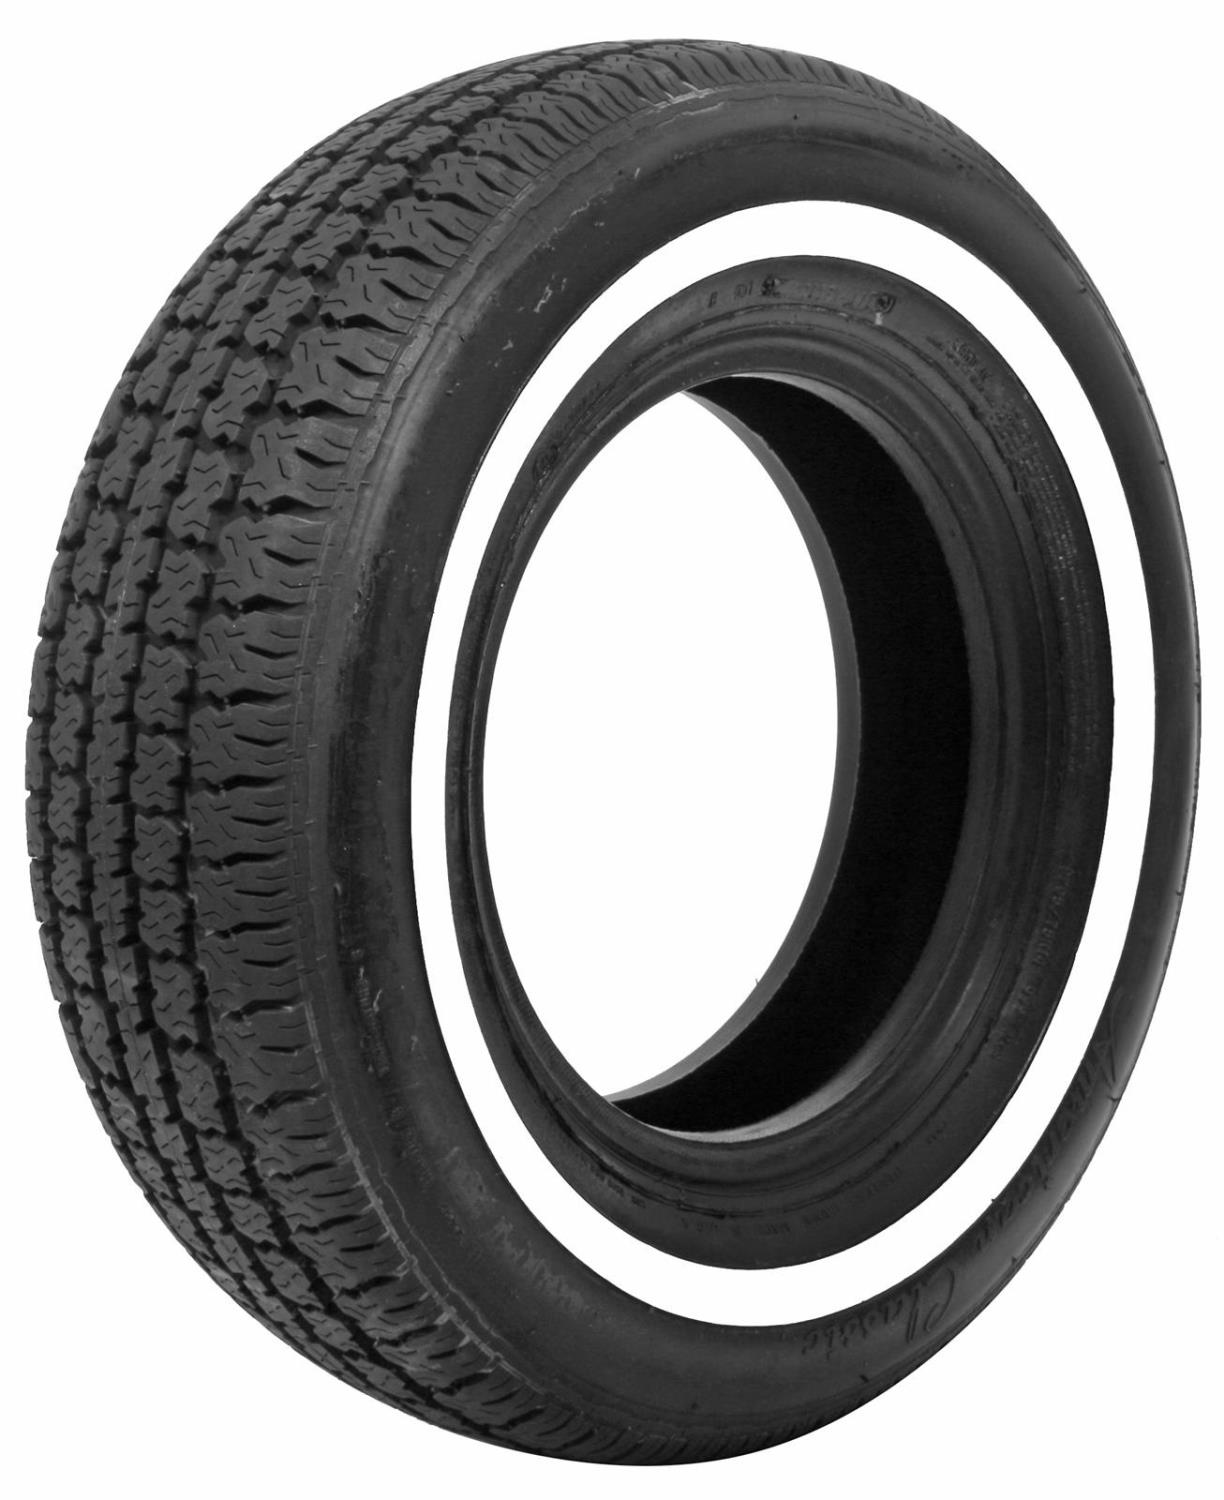 American Classic Collector Narrow Whitewall Radial Tire 235/75R14